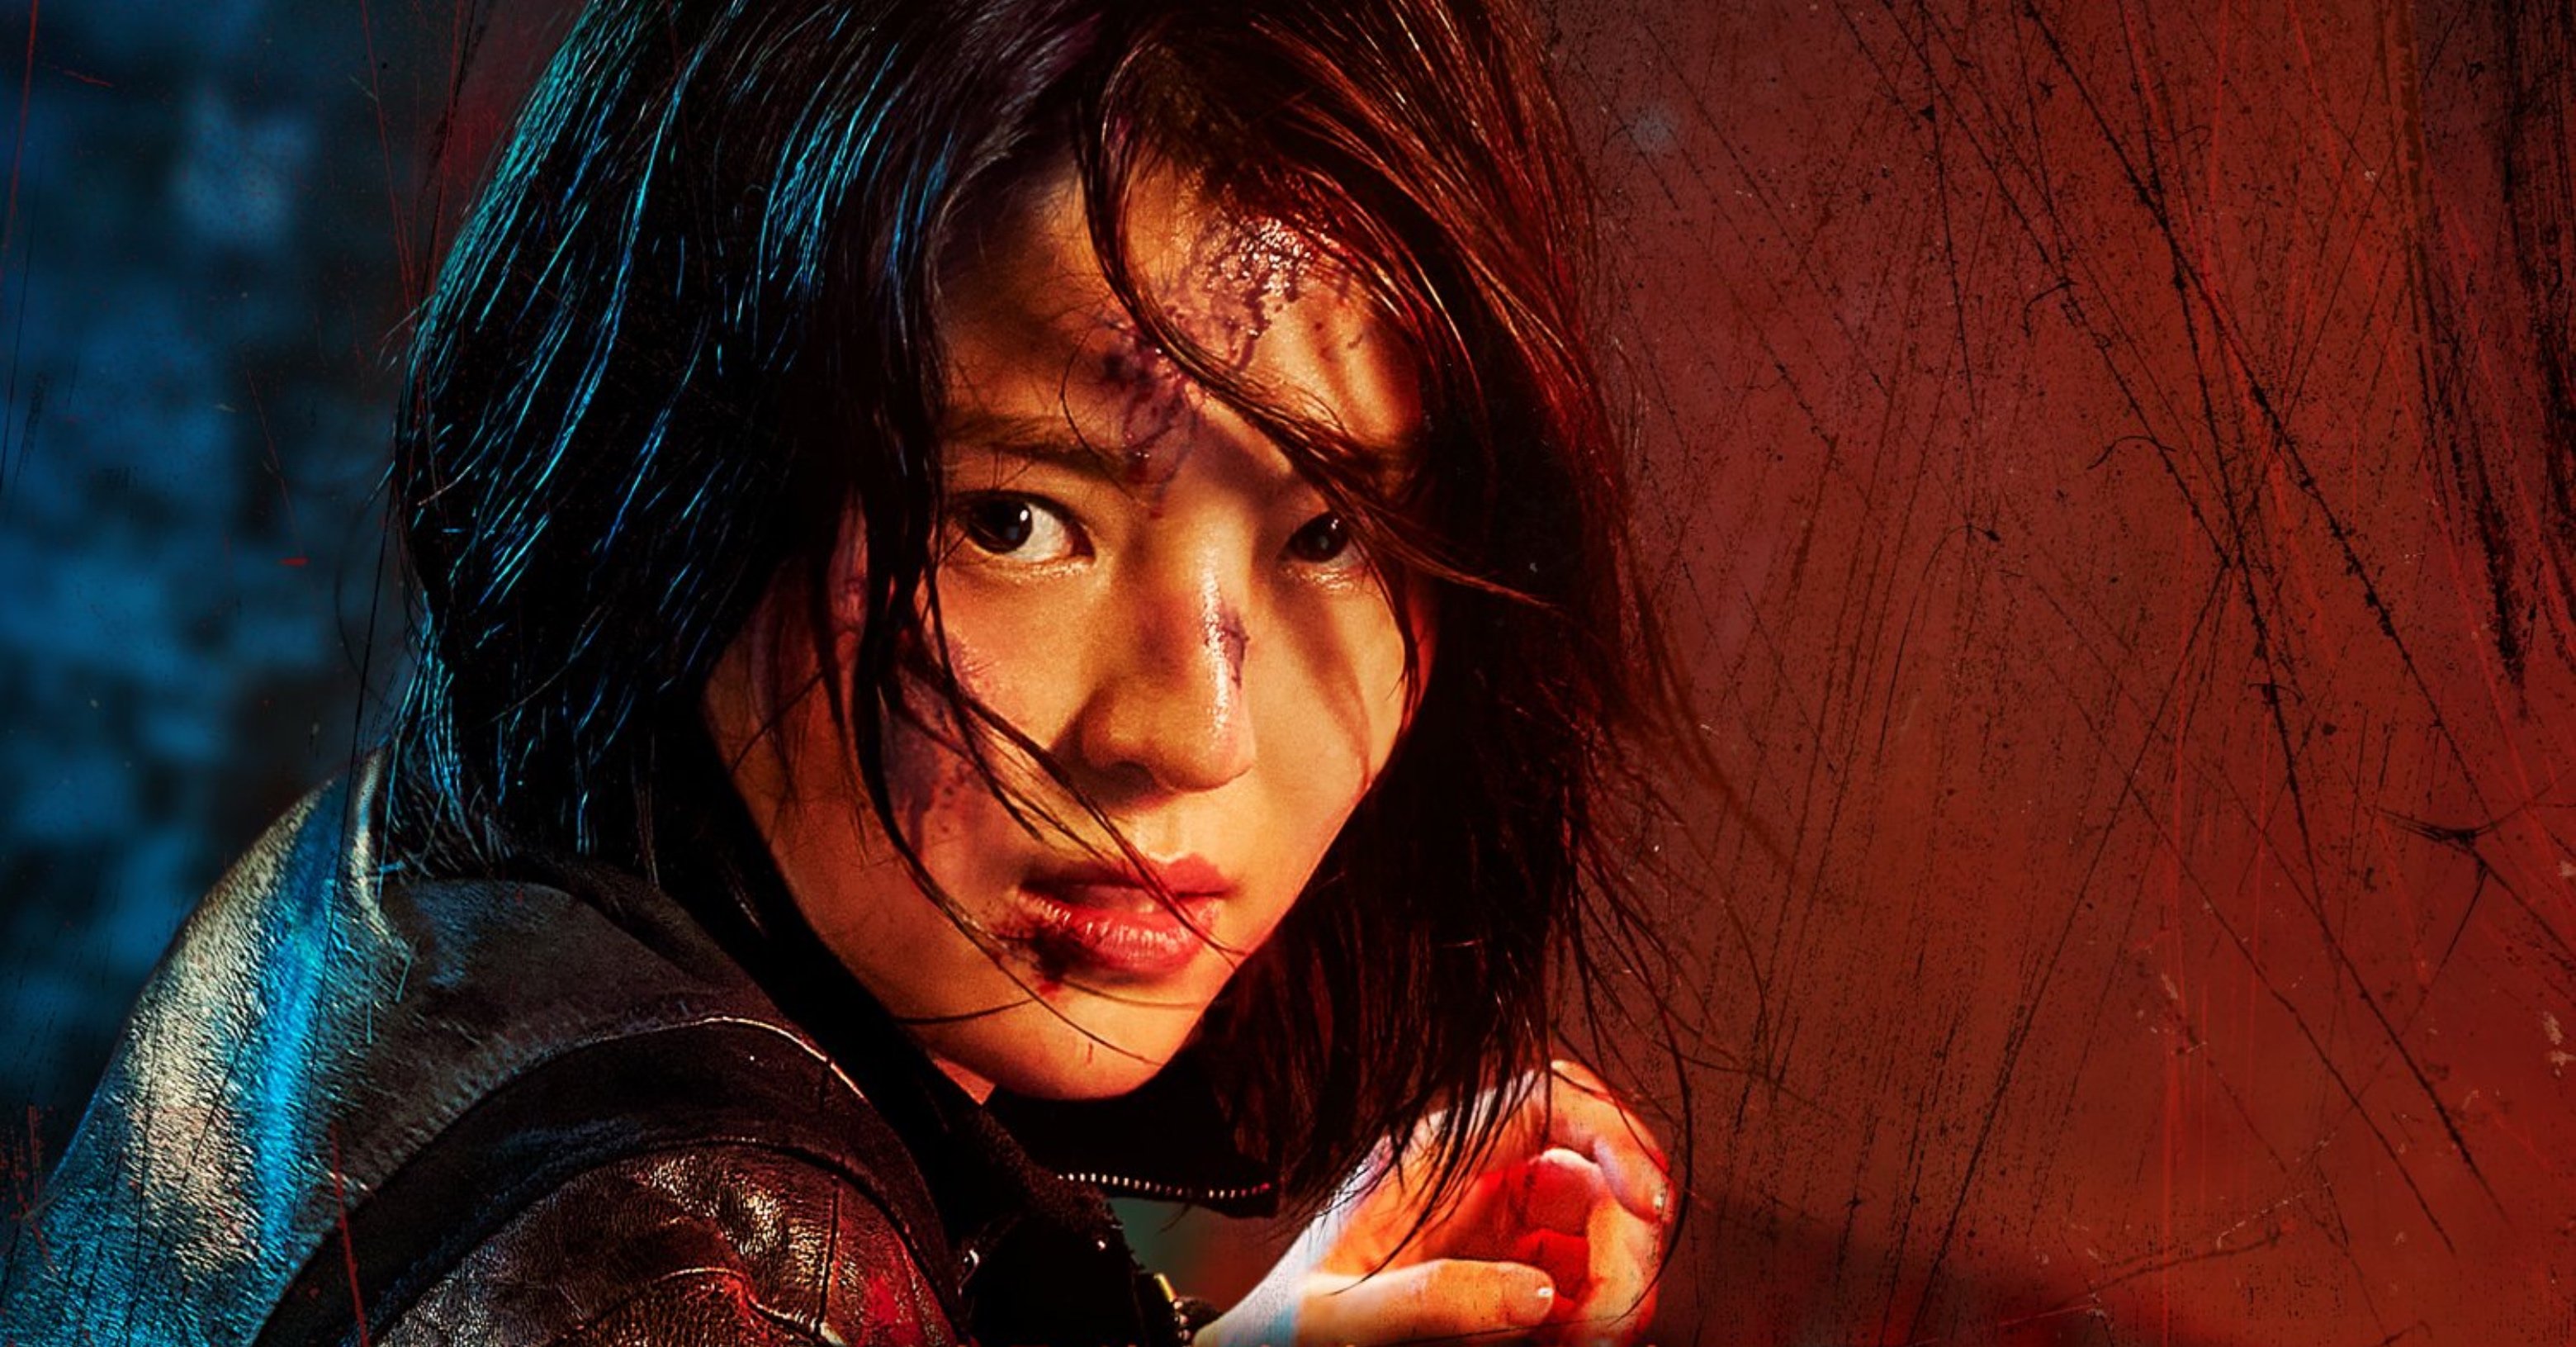 Han So-hee for 'My Name' as Ji-woo poster with bloodied face and holding knife